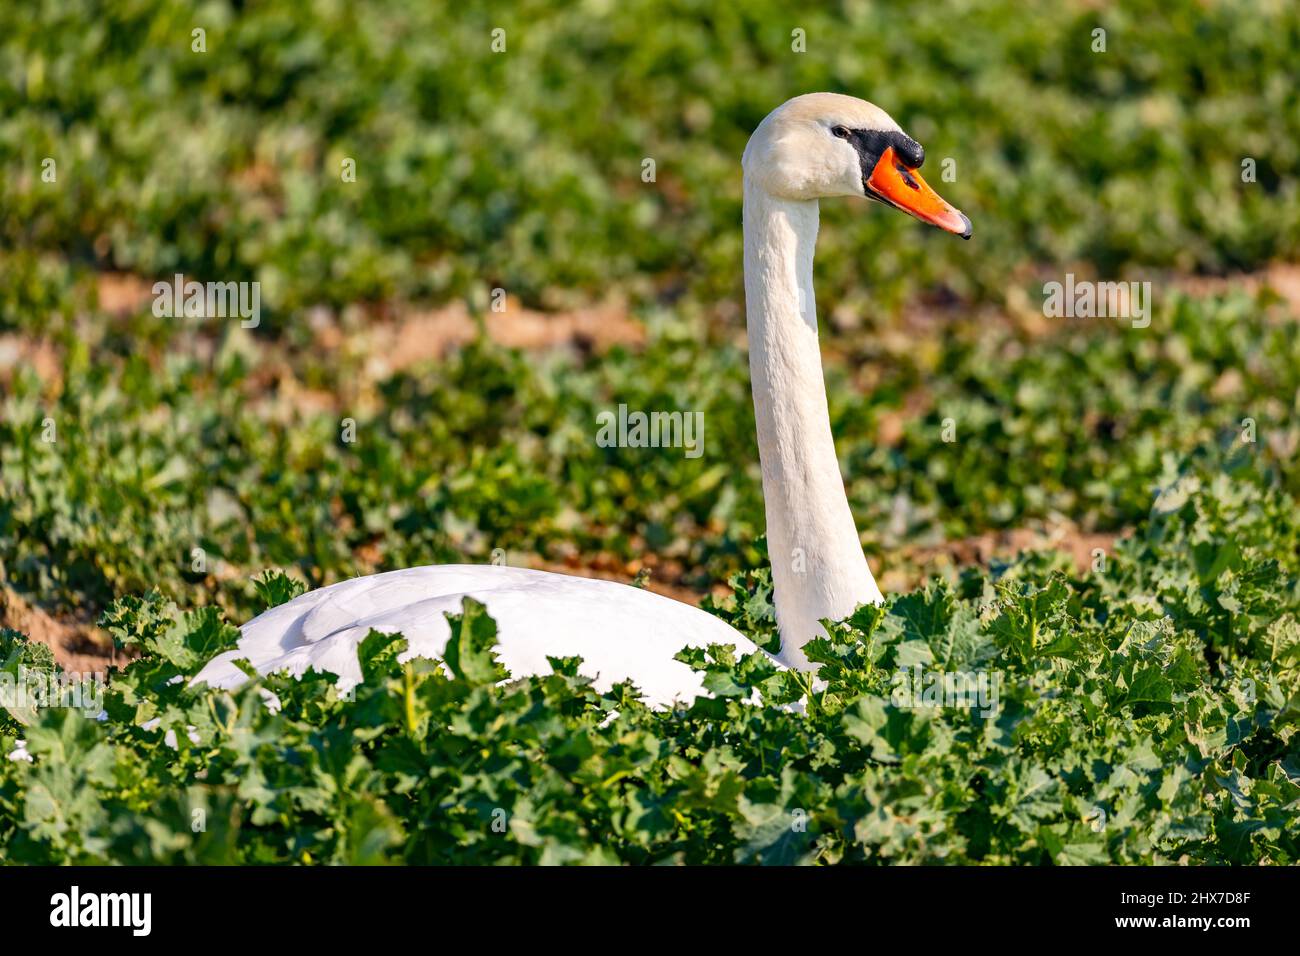 Close-up of a swan with neck and head released in front of a green field in winter Stock Photo